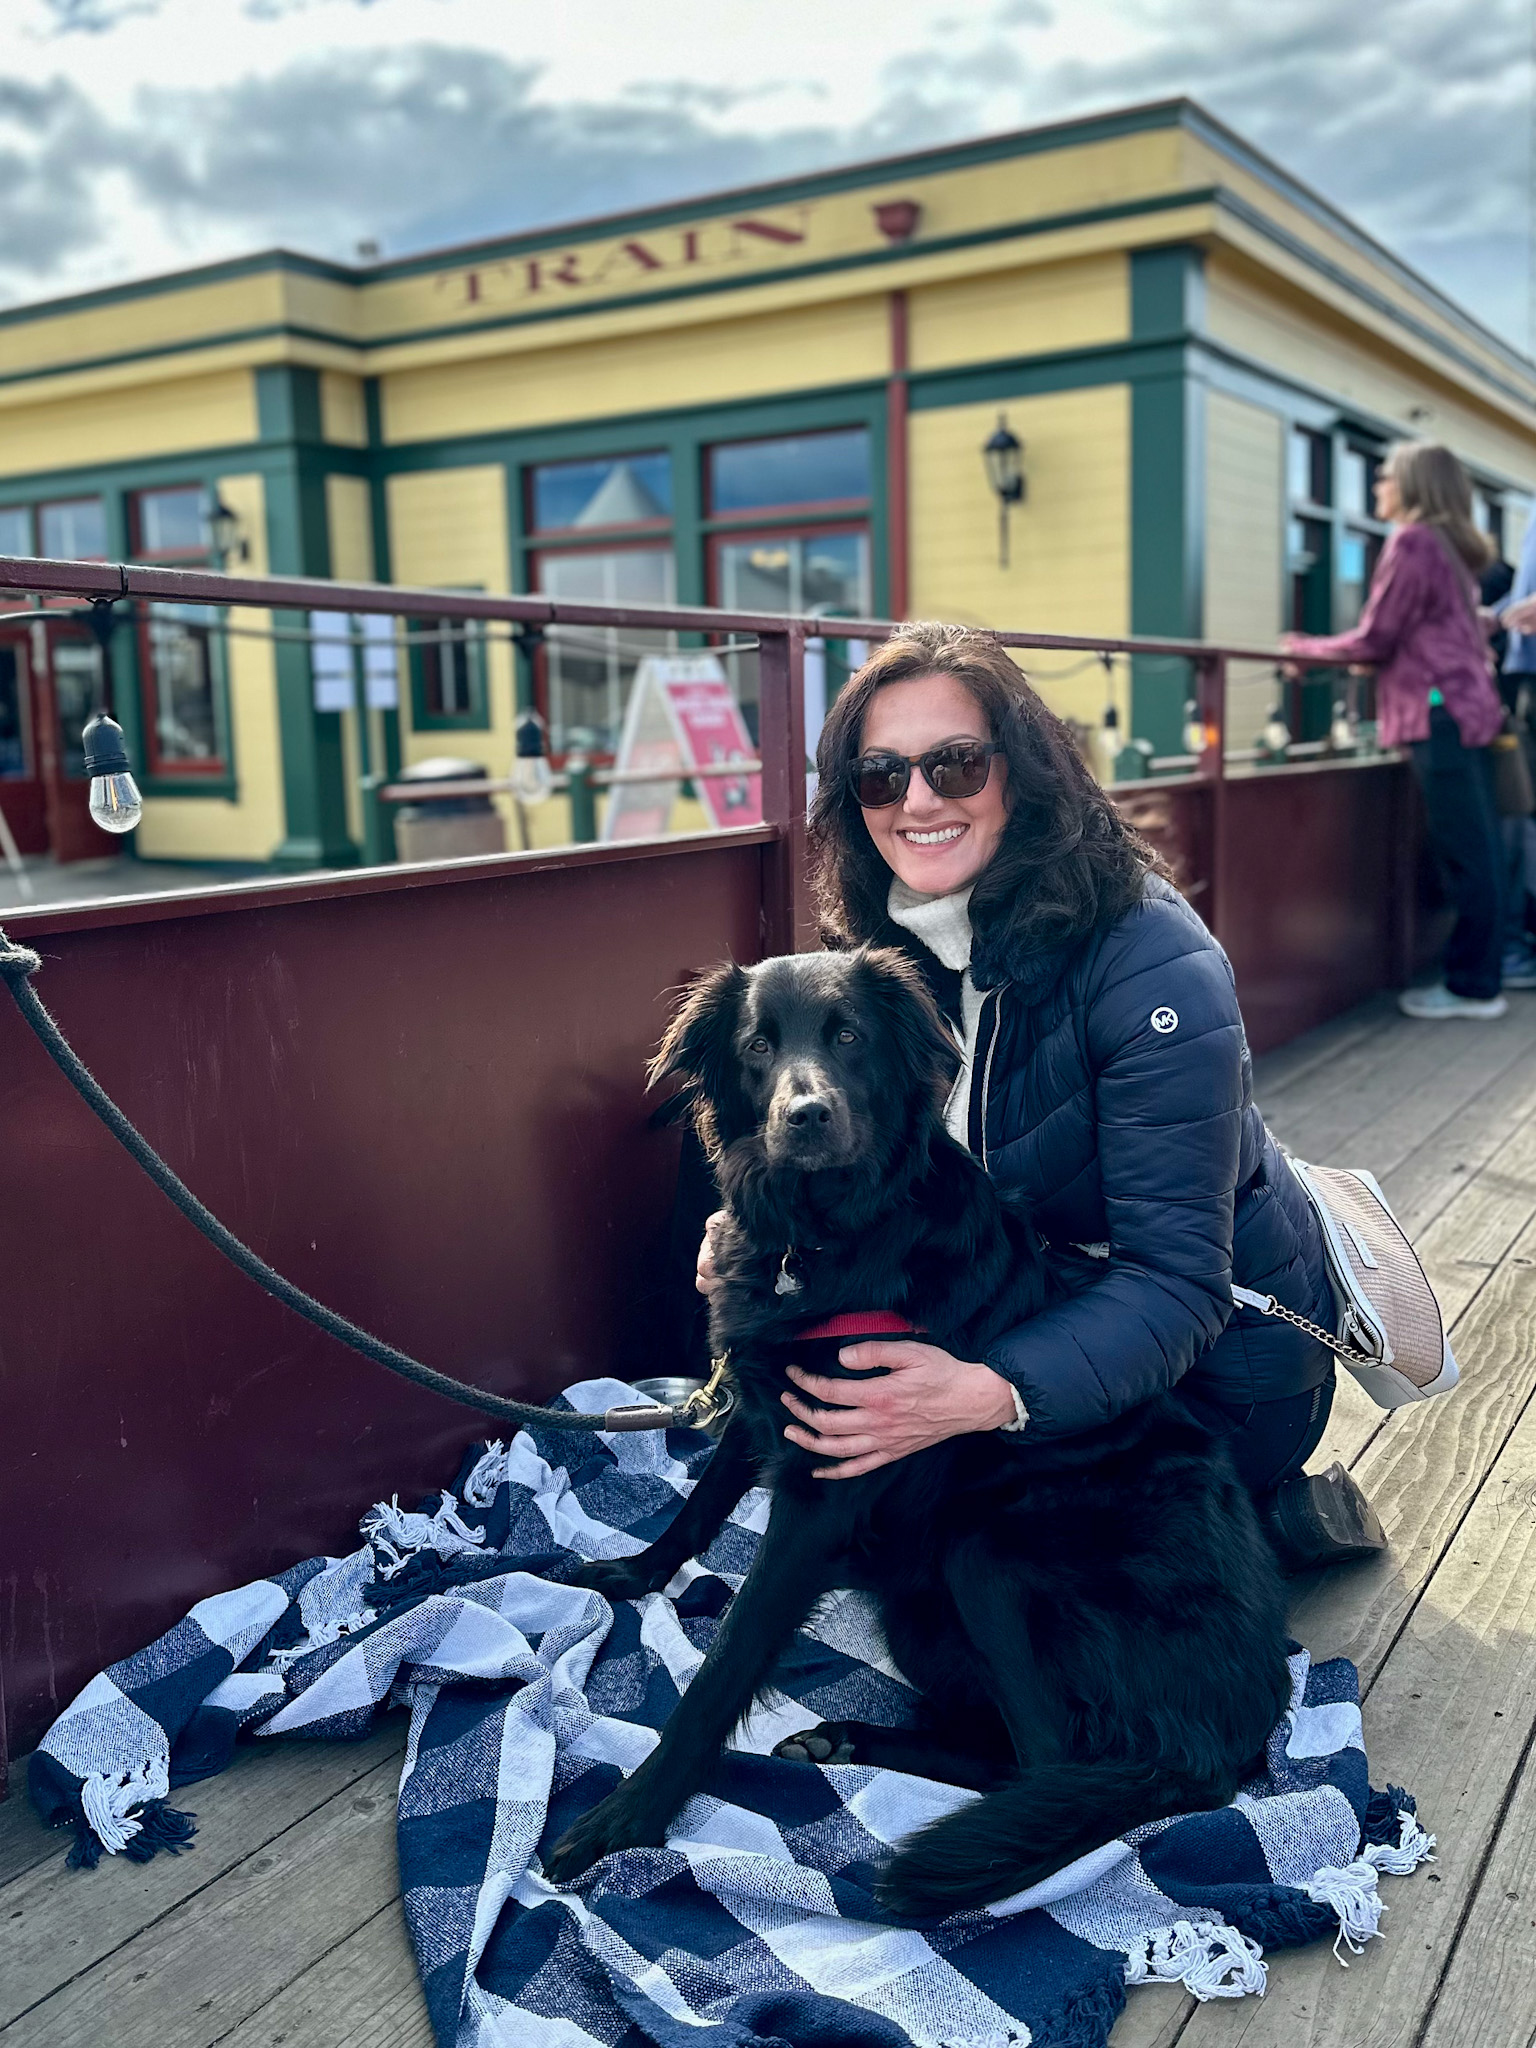 The Ultimate Dog Friendly Travel Guide to Mendocino California